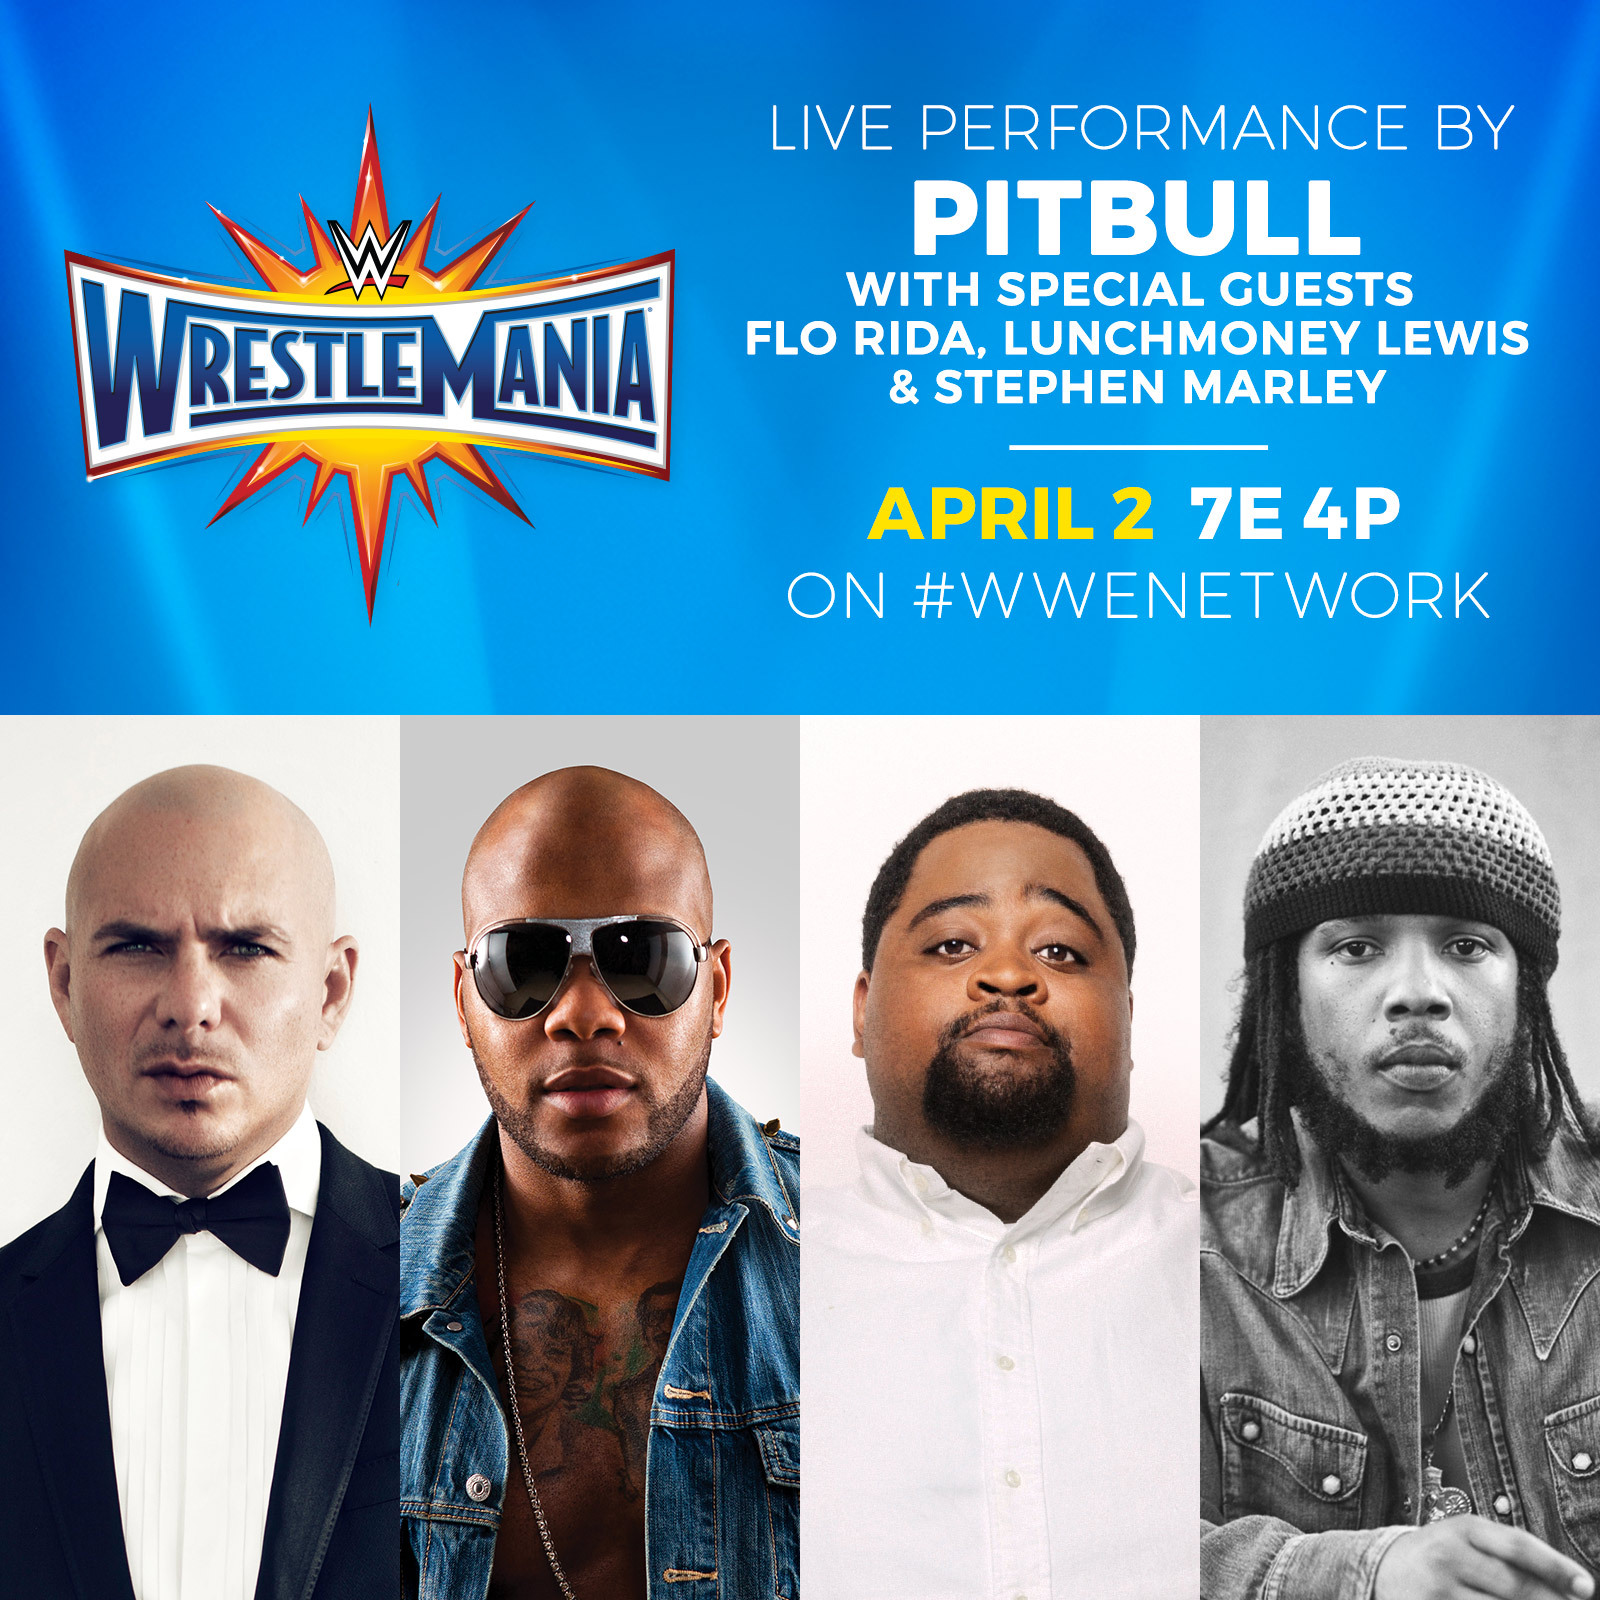 Pitbull Flo Rida Stephen Marley And Lunchmoney Lewis To Perform At Wrestlemania Business Wire